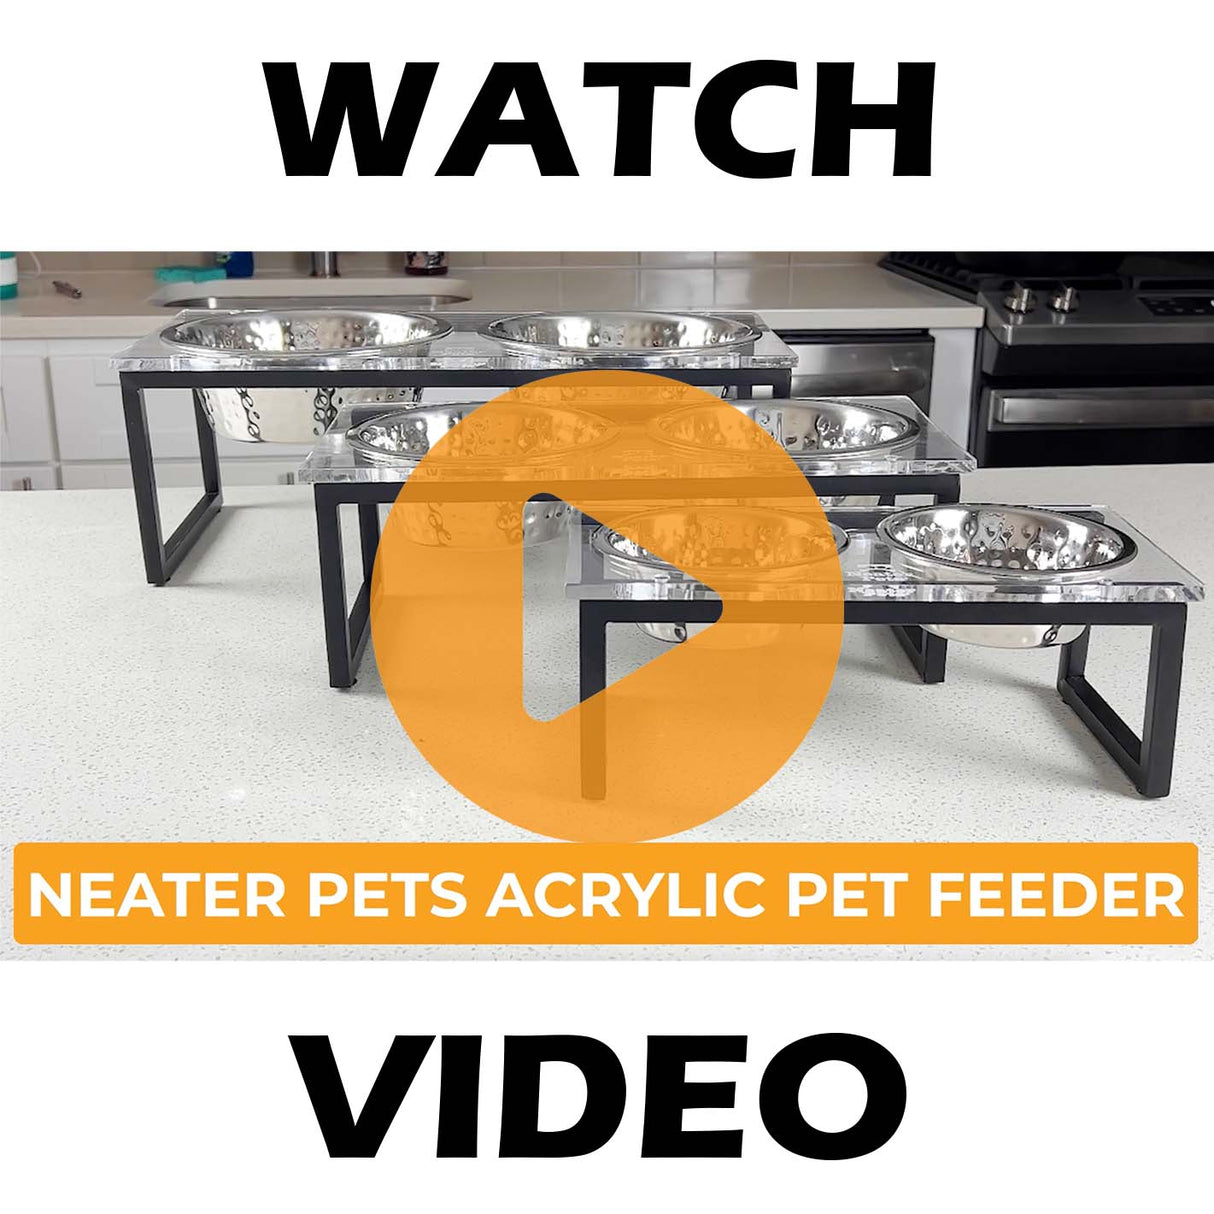 Video showing the Acrylic Pet Feeder